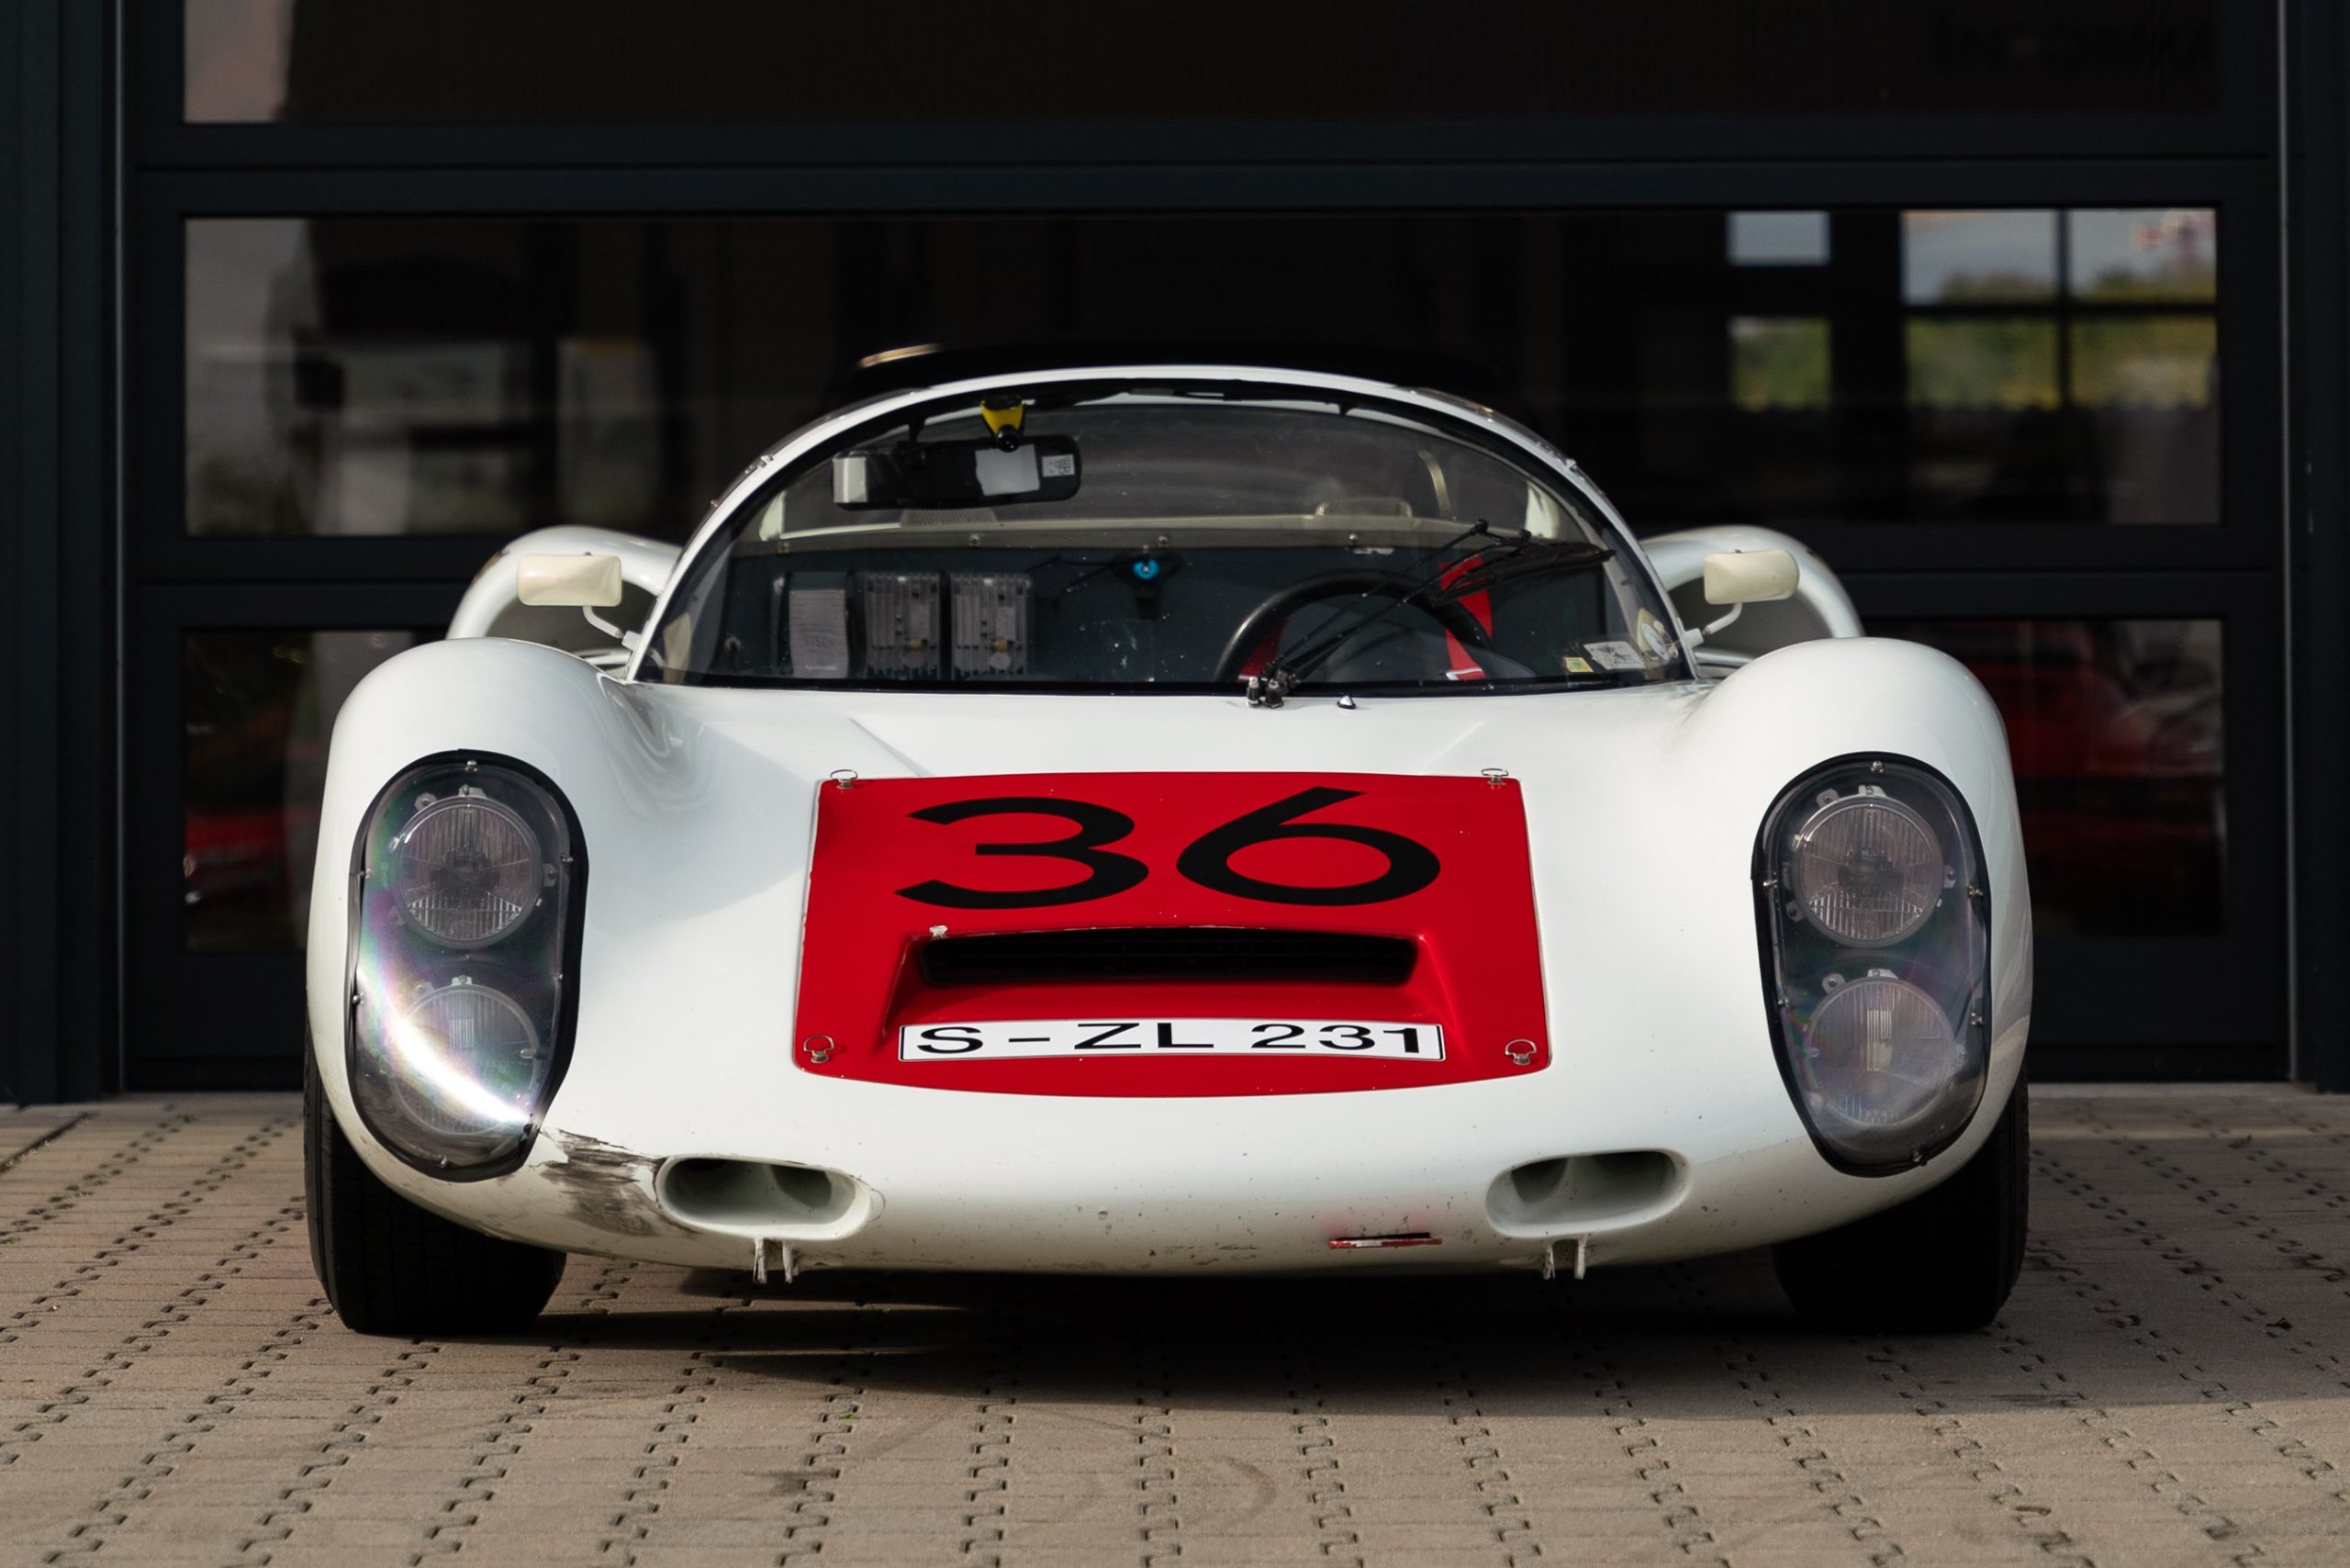 Frontal view of a white and red 1966 Porsche 910 race car.